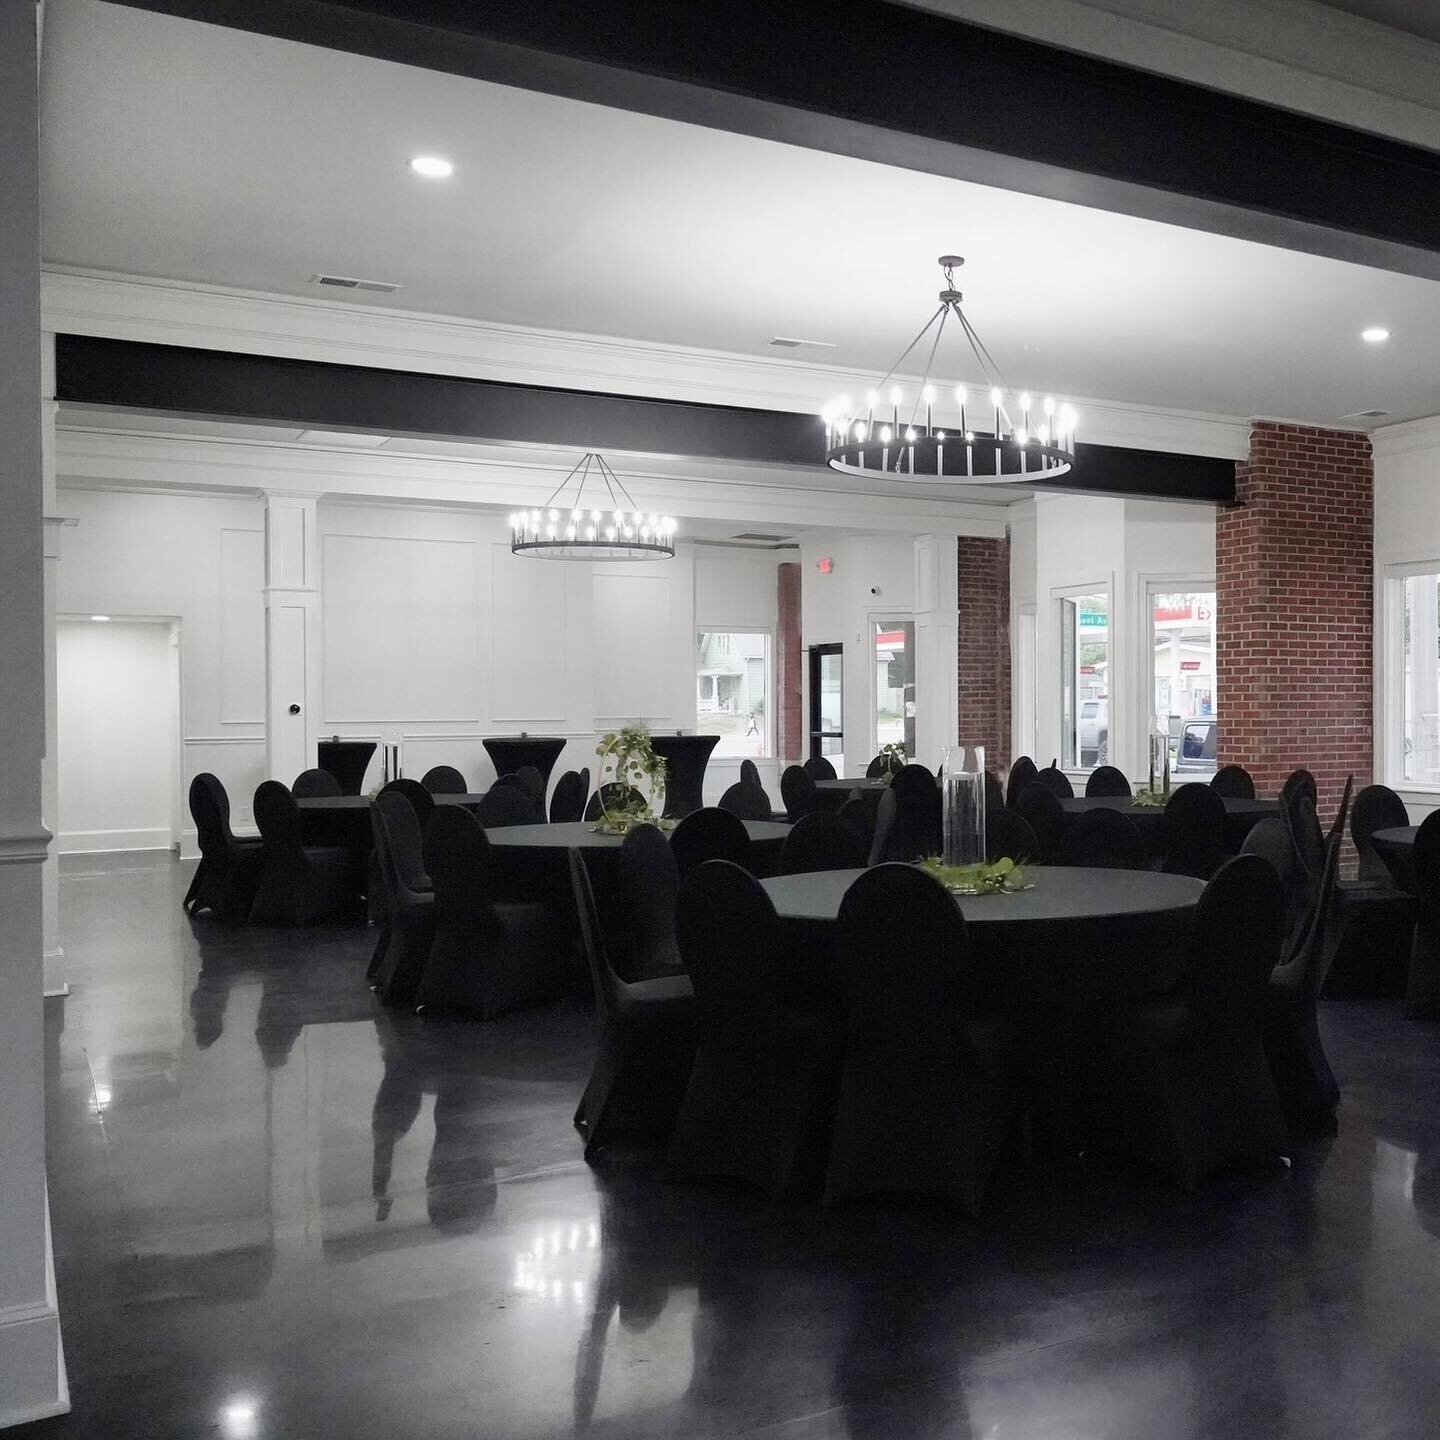 Are you looking for the perfect venue for your shower, reception, corporate event or banquet?  The Nest comfortably seats 120 guests and is perfect for your upcoming event!🤍
🖤🤍